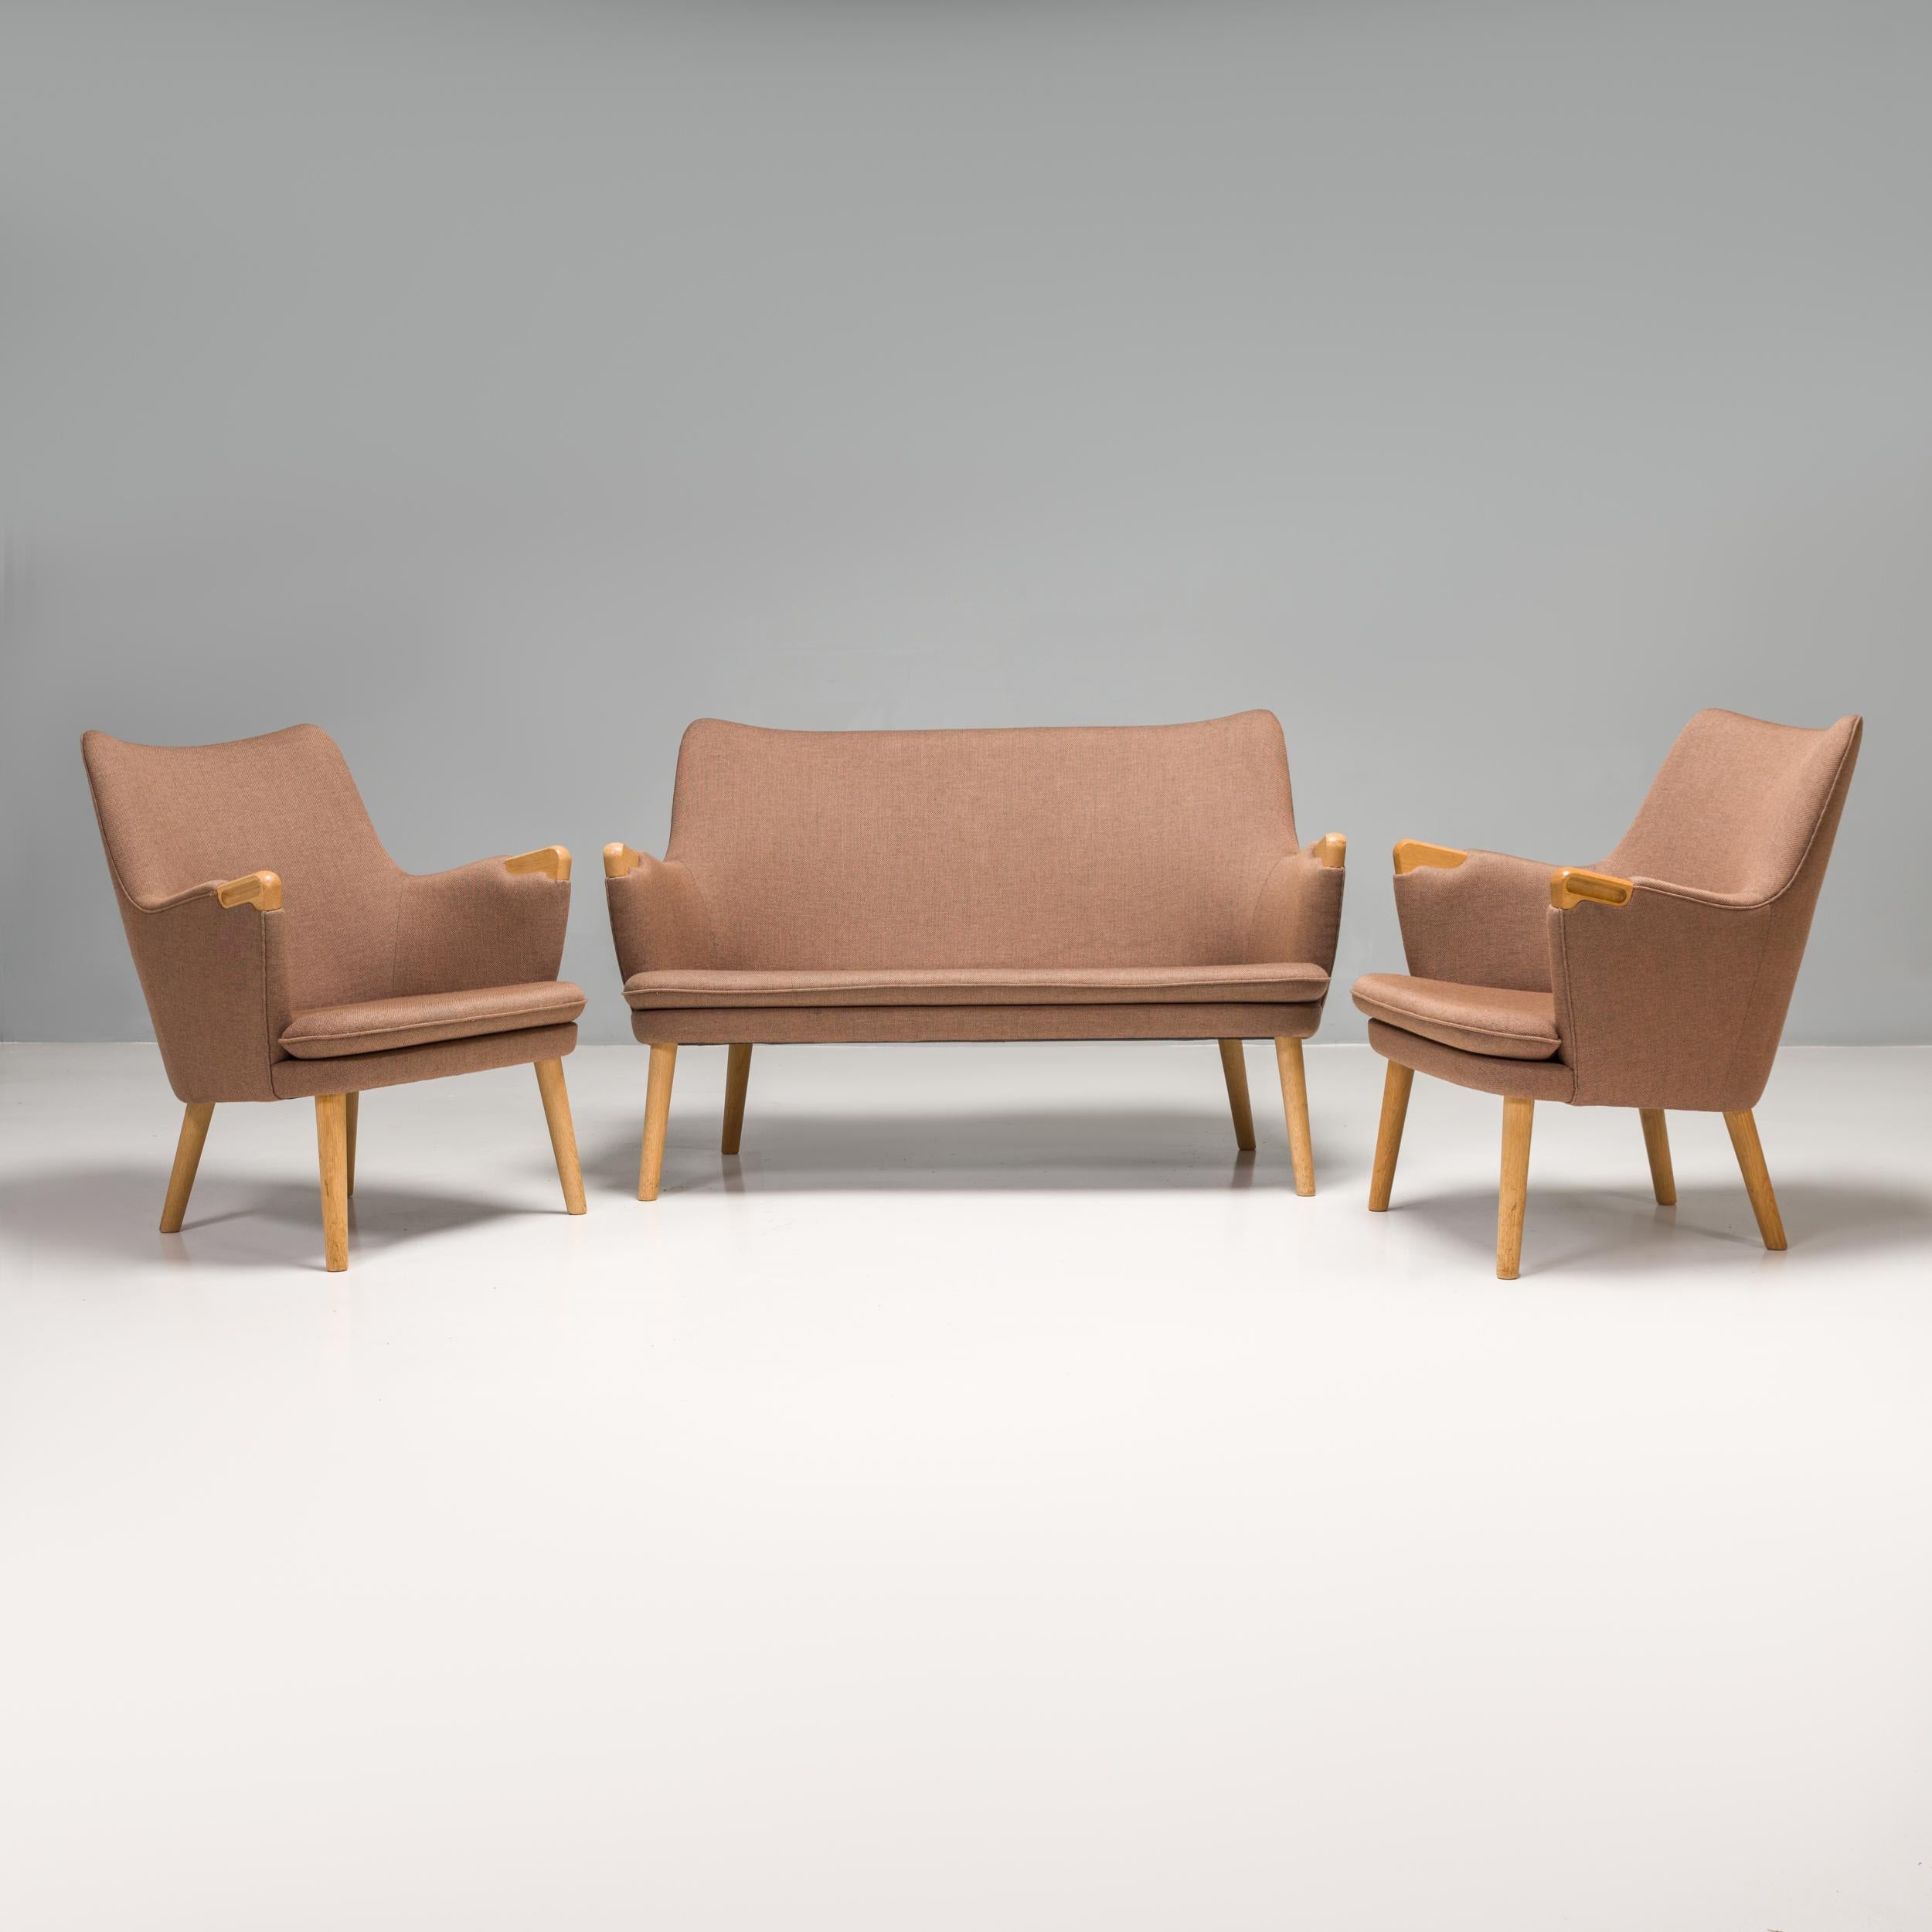 Originally designed by Hans J. Wegner in 1952 for the Magasin du Nord store in Copenhagen, this CH72 sofa and CH71 armchair set is manufactured by Carl Hansen & Son and is a fantastic example of mid-century Scandinavian design.

Combining both